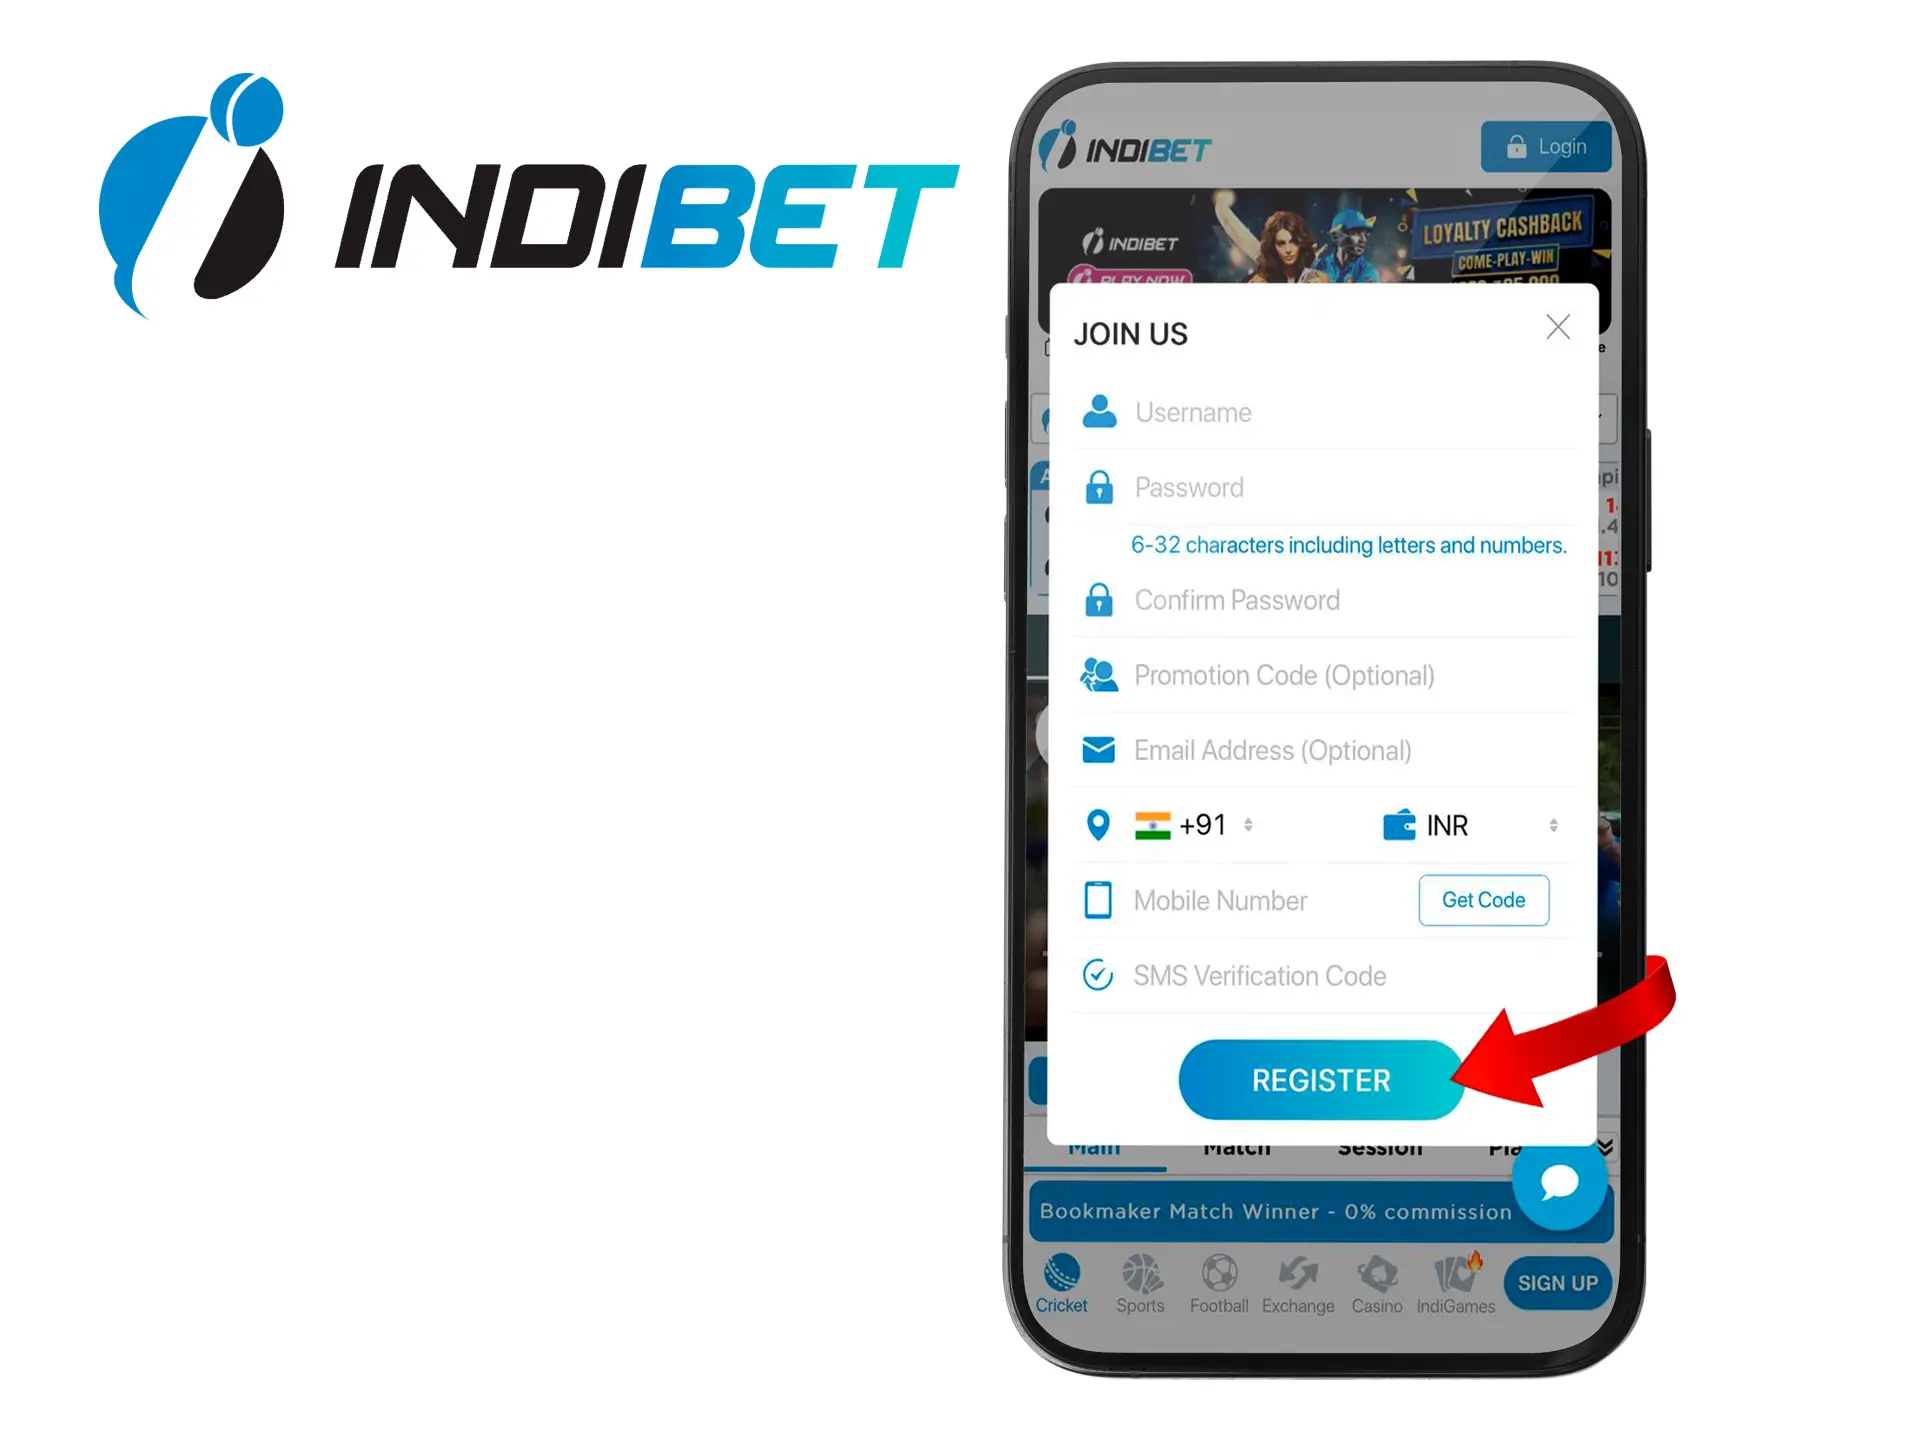 Confirm your Indibet membership and start playing and betting.